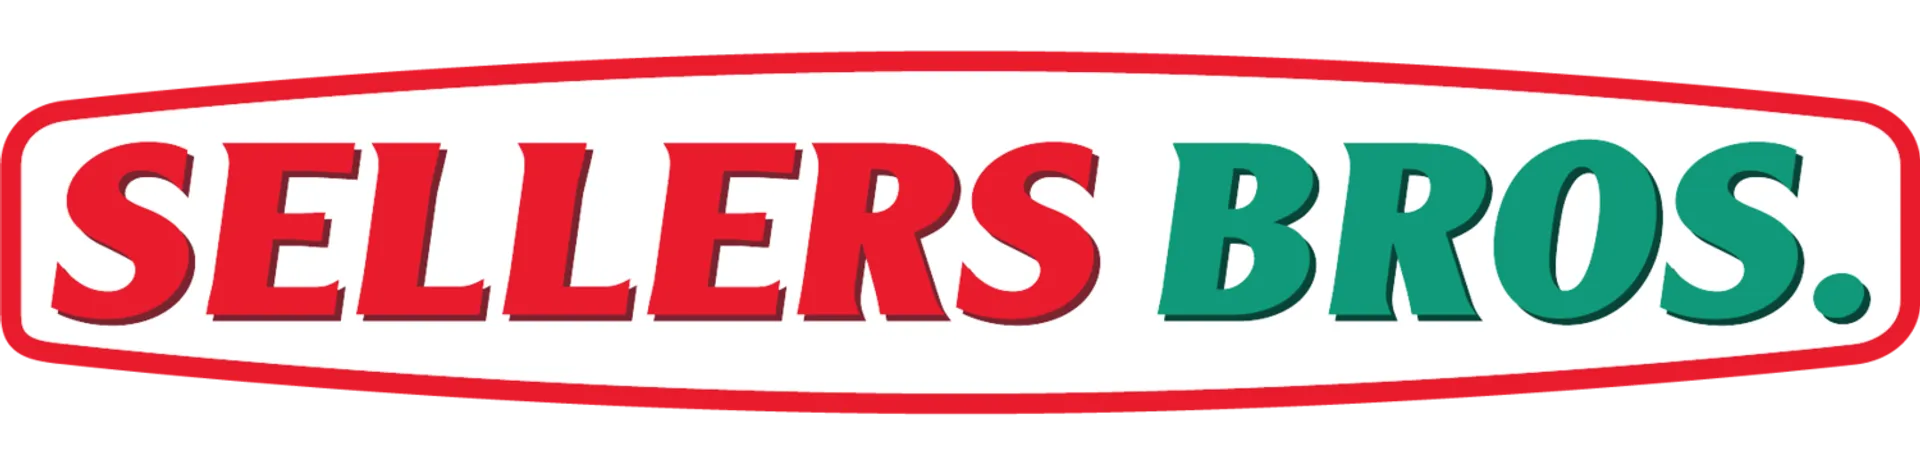 SELLERS BROS logo current weekly ad